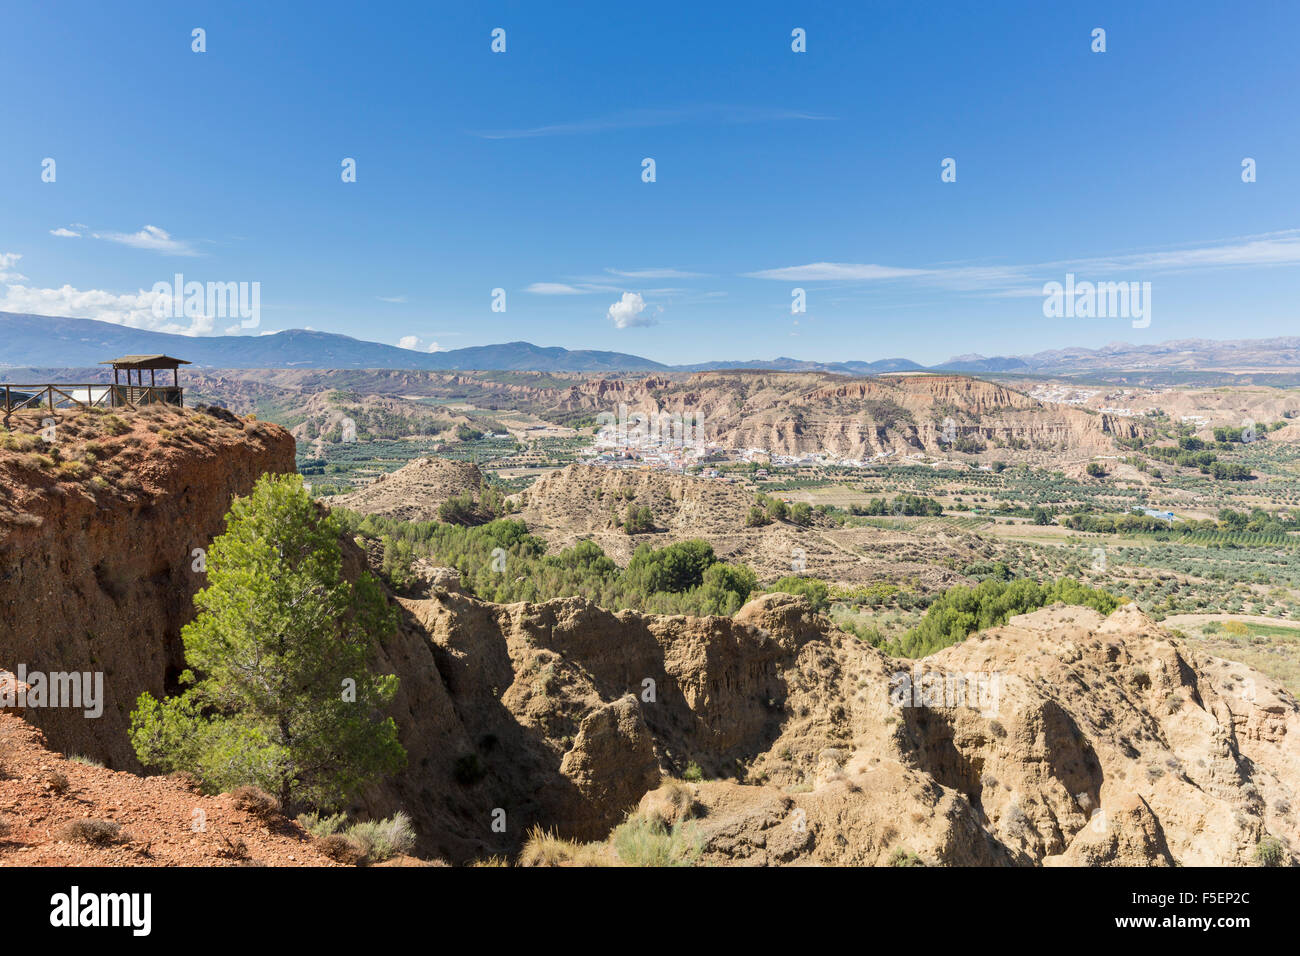 View from Mirador of the gorge outside Guadix, Andalucia, Spain landscape Stock Photo